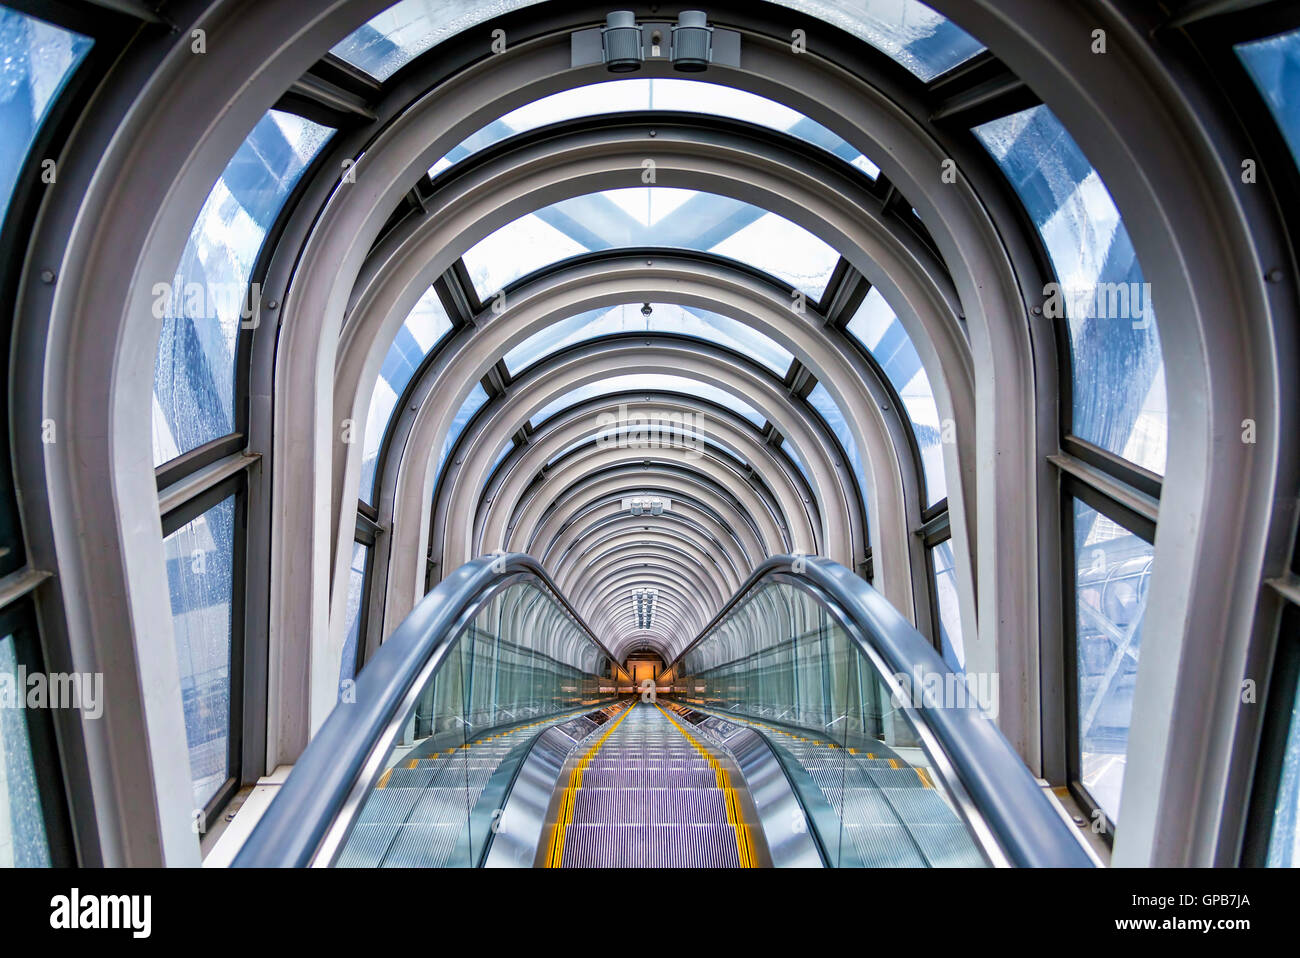 Osaka, Japan - April 29, 2014: View of the spectacular escalator in Umeda Sky Building, a modern high rise skyscraper. Stock Photo